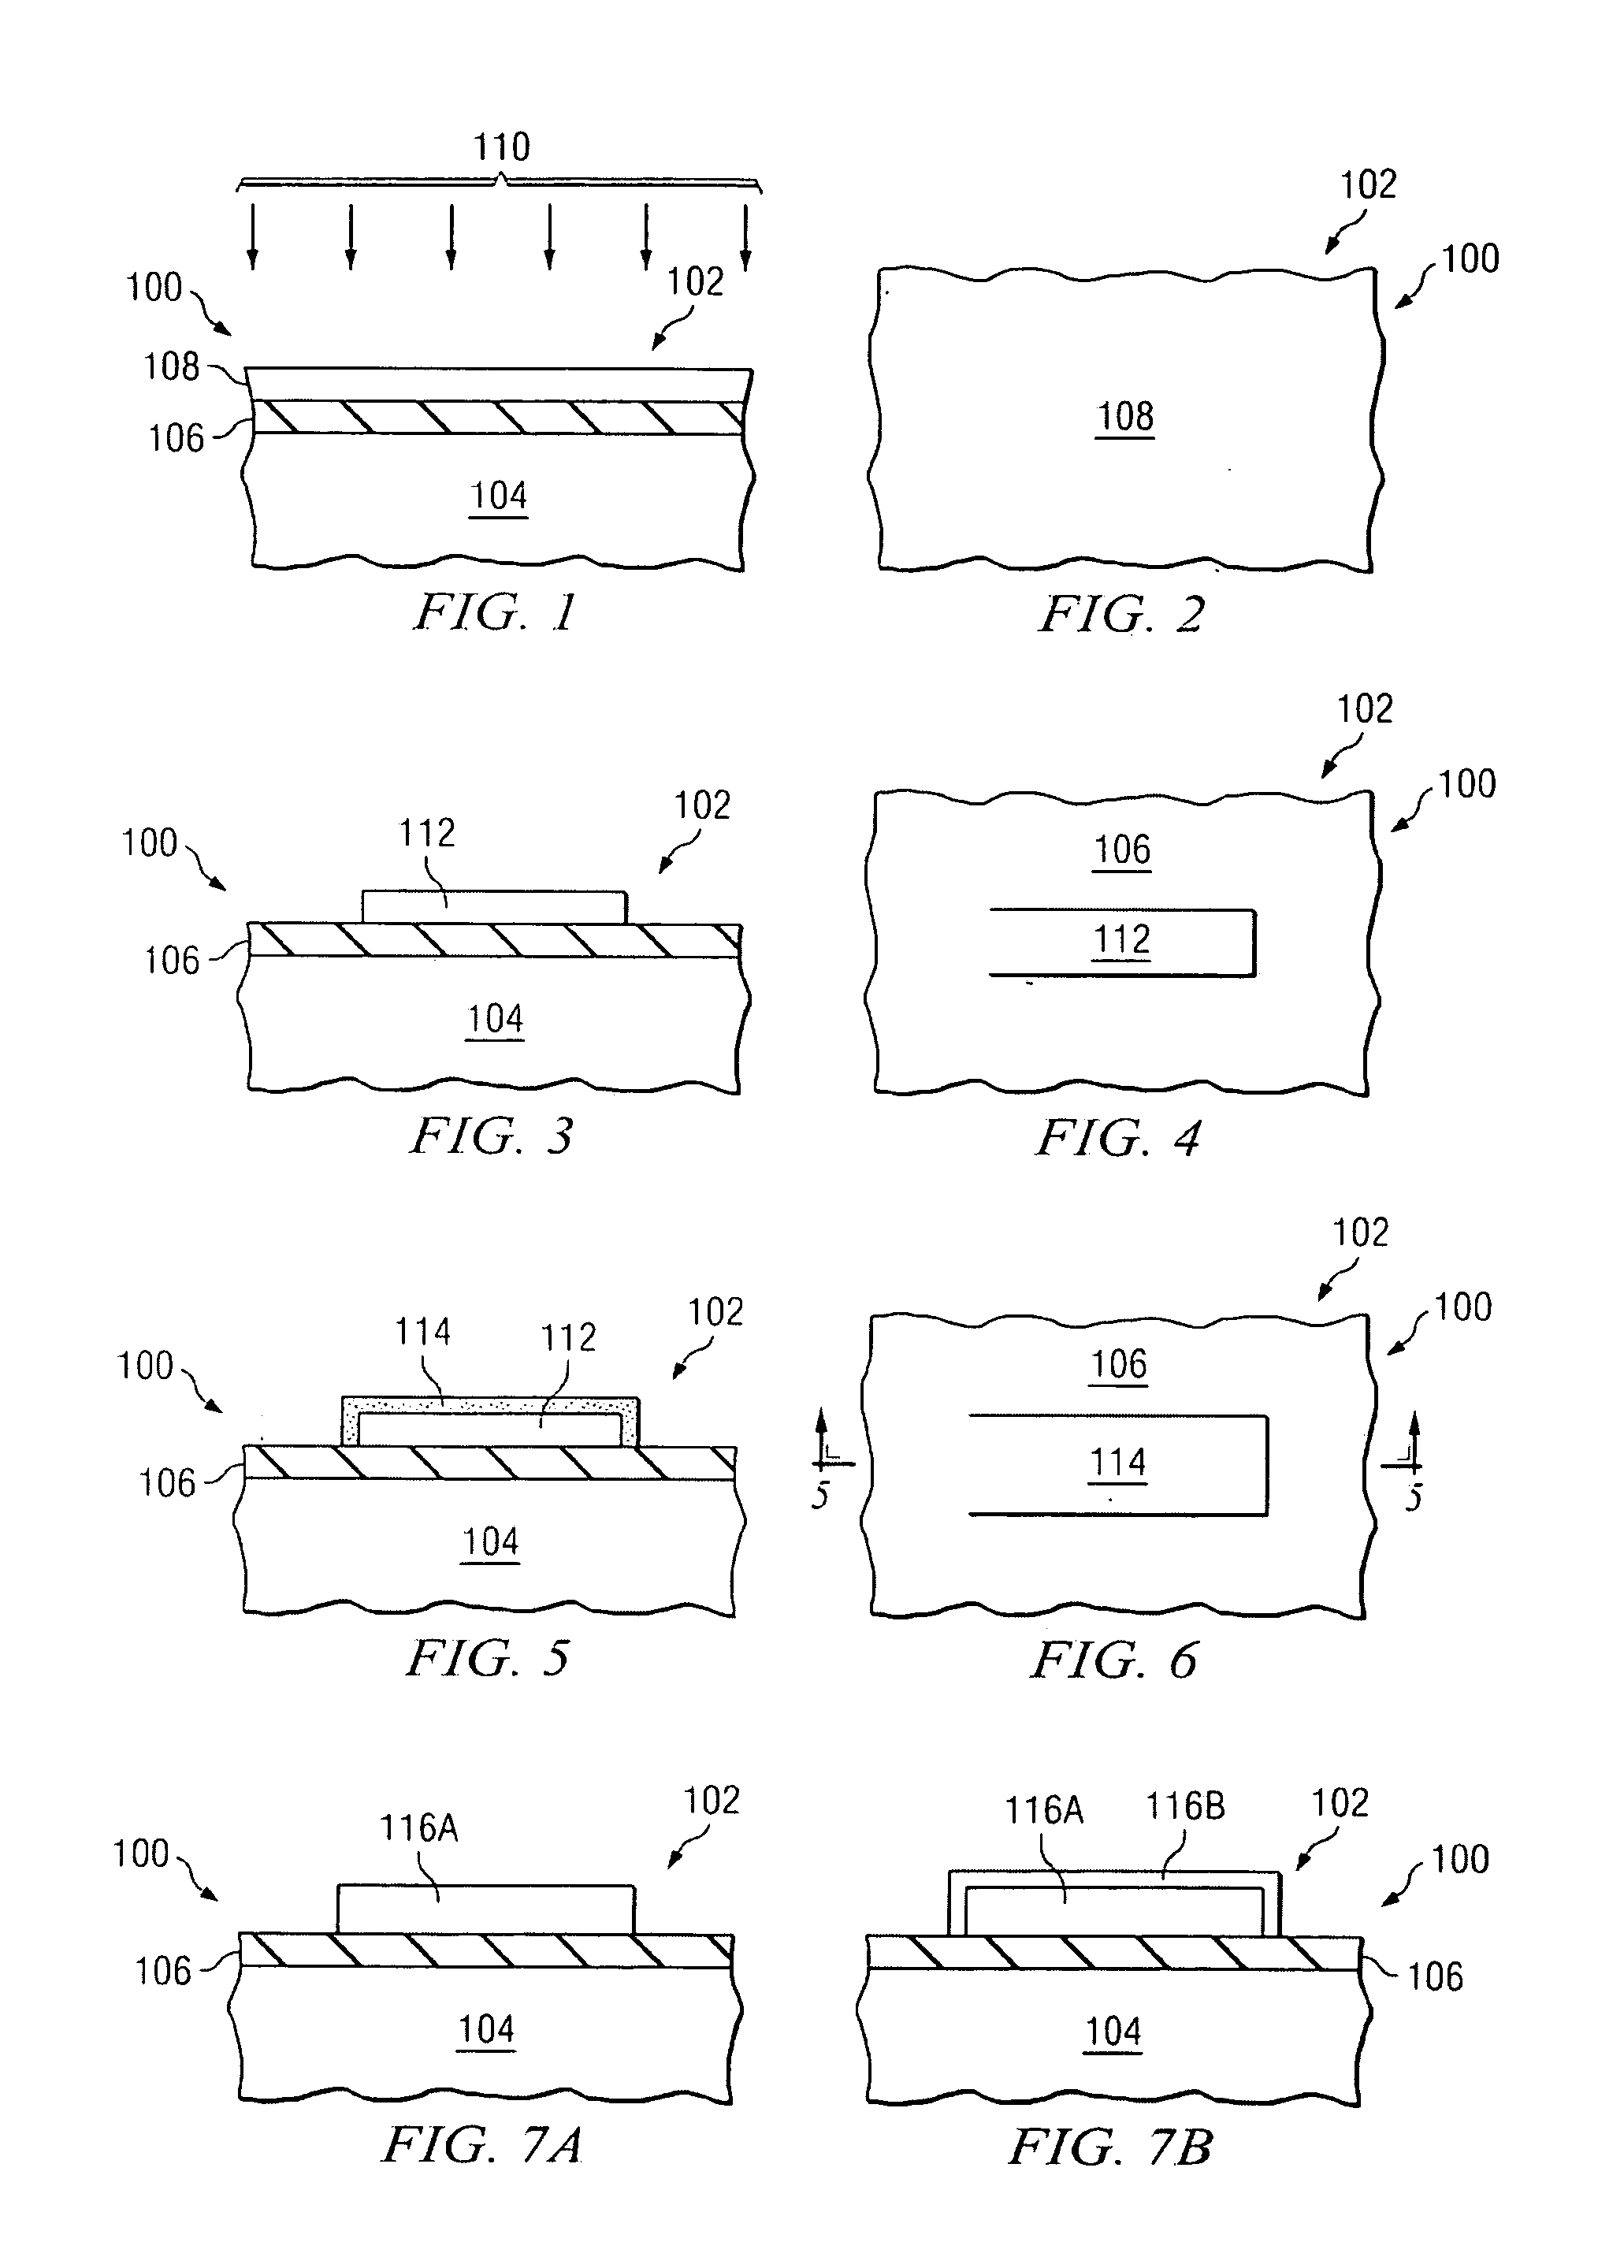 Method for fabricating graphene transistors on a silicon or soi substrate